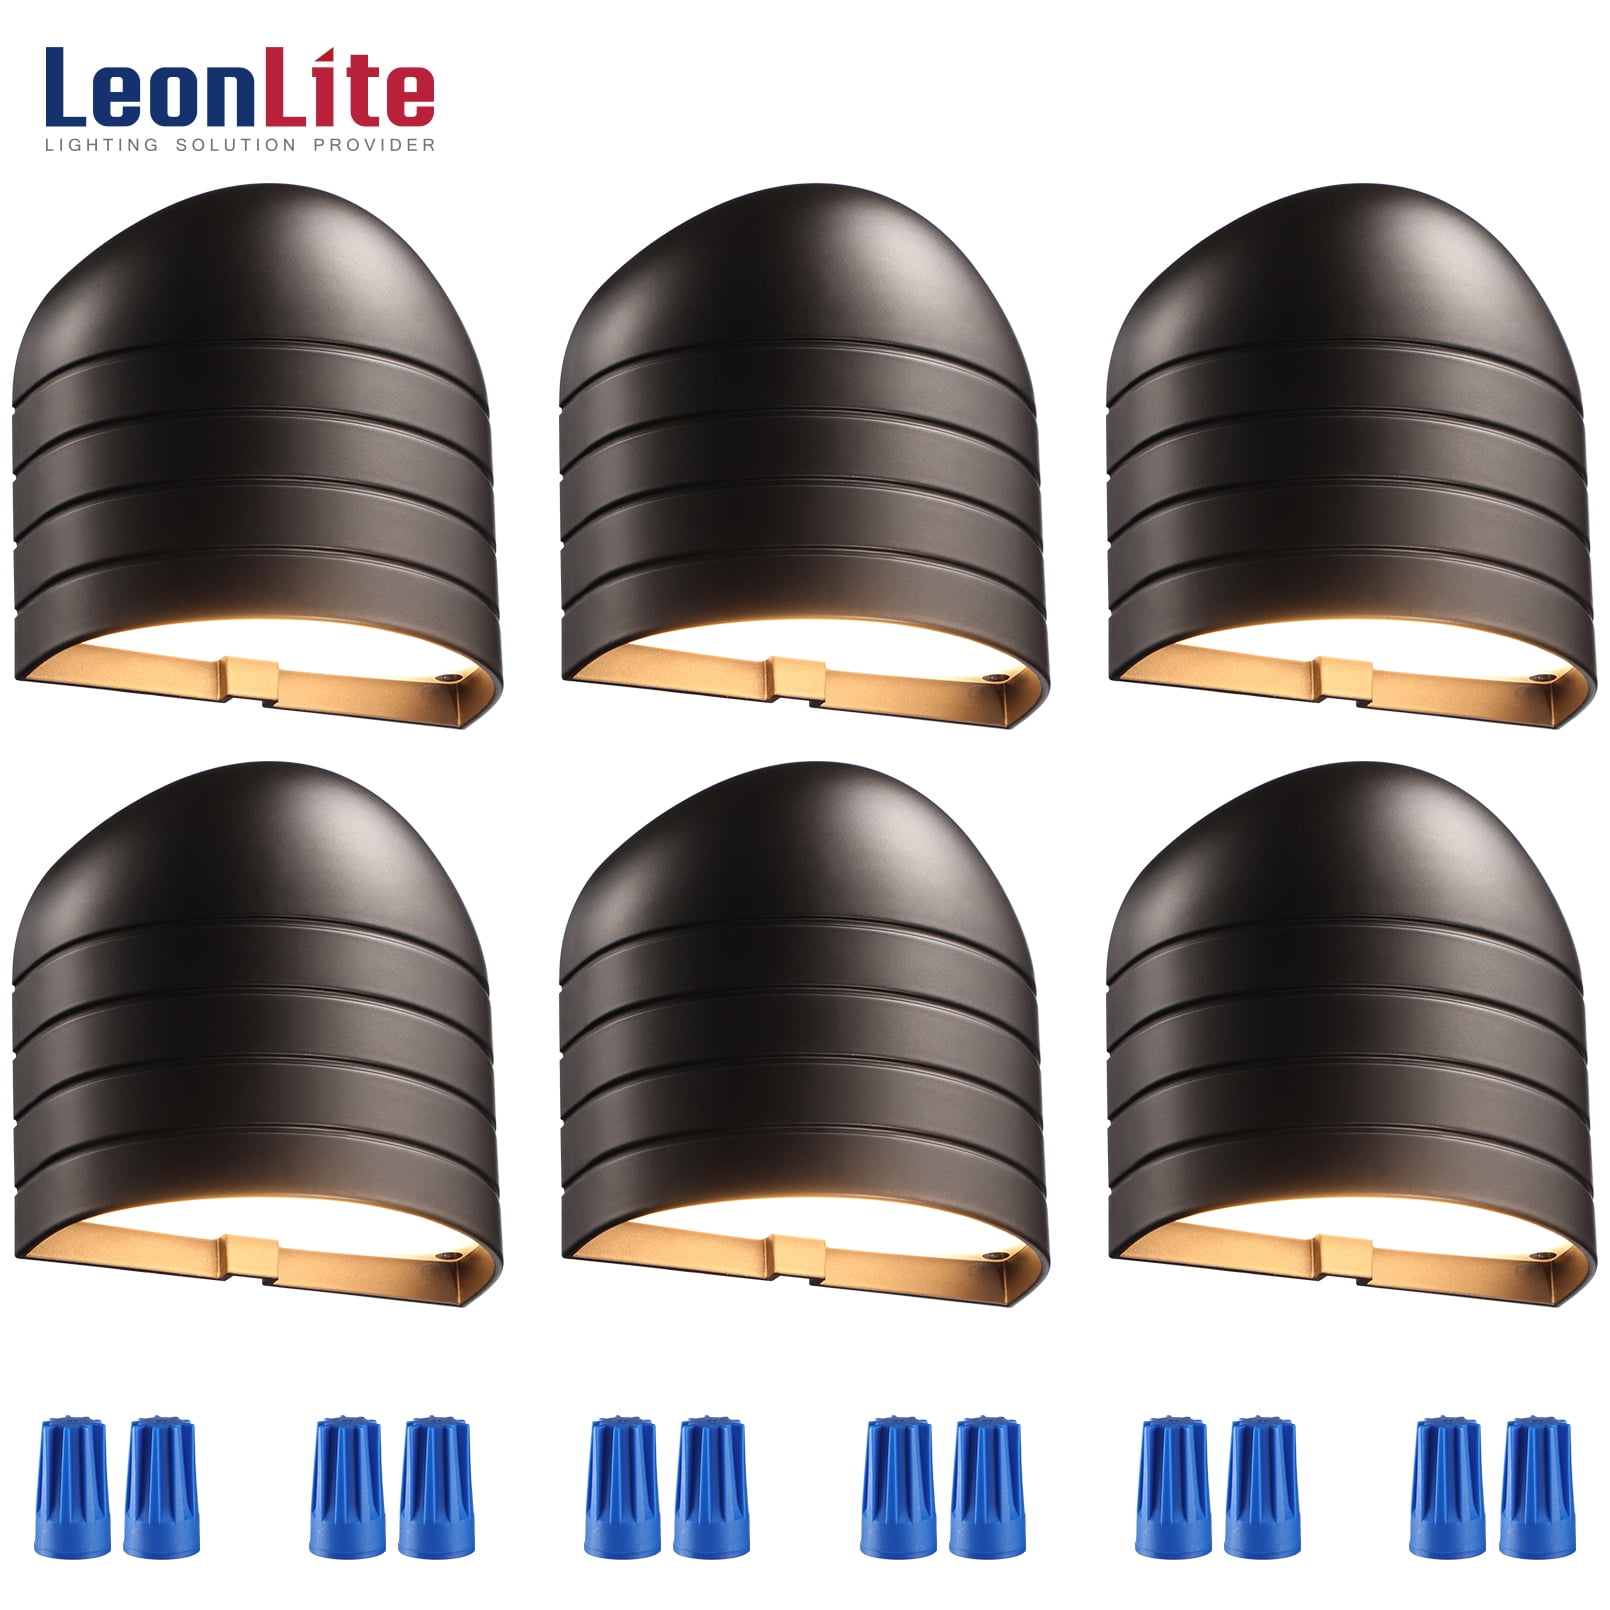 LEONLITE 12-Pack 5W Ultra Bright Fence Down Lights, Anti-Dazzling LED Deck - 4